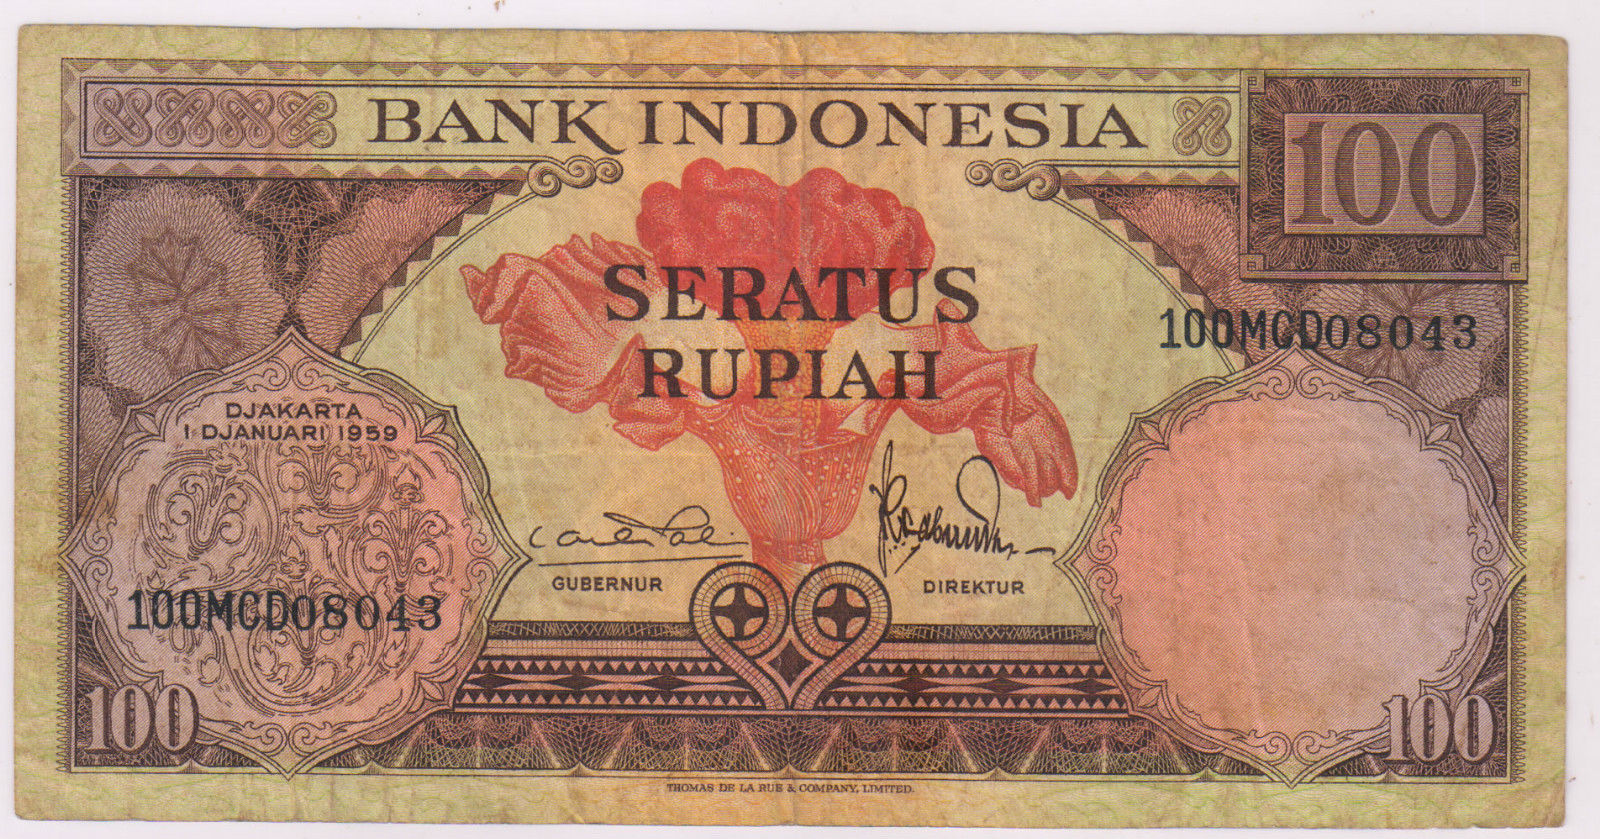  INDONESIA  P 69 100 RUPIAH 1959 used currency  note  KB 